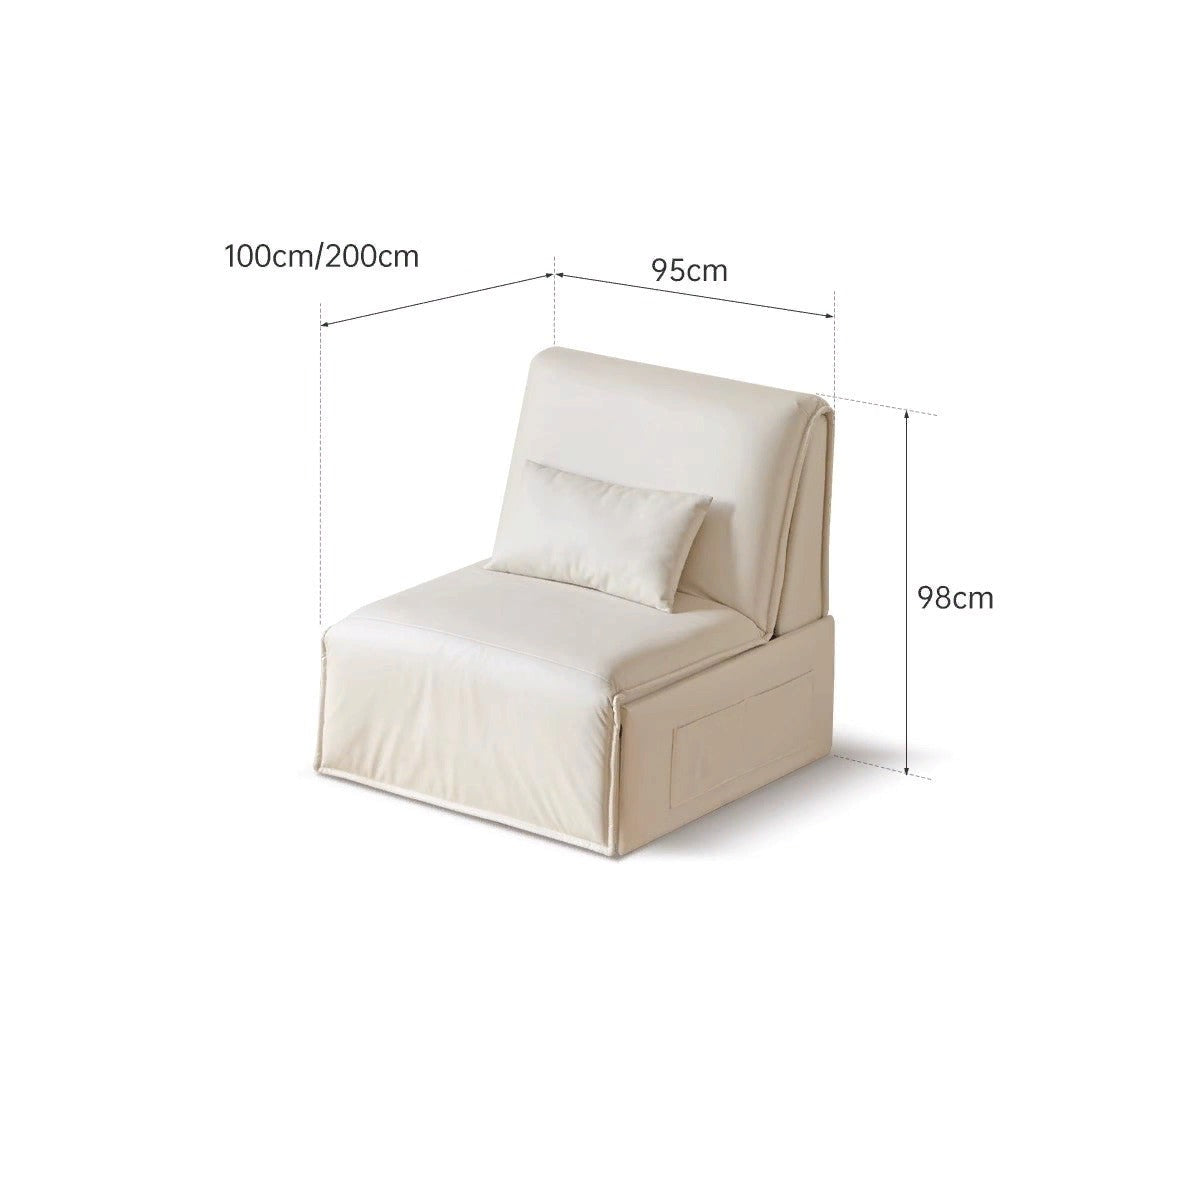 Electric sofa bed multi-functional folding telescopic technology fabric+